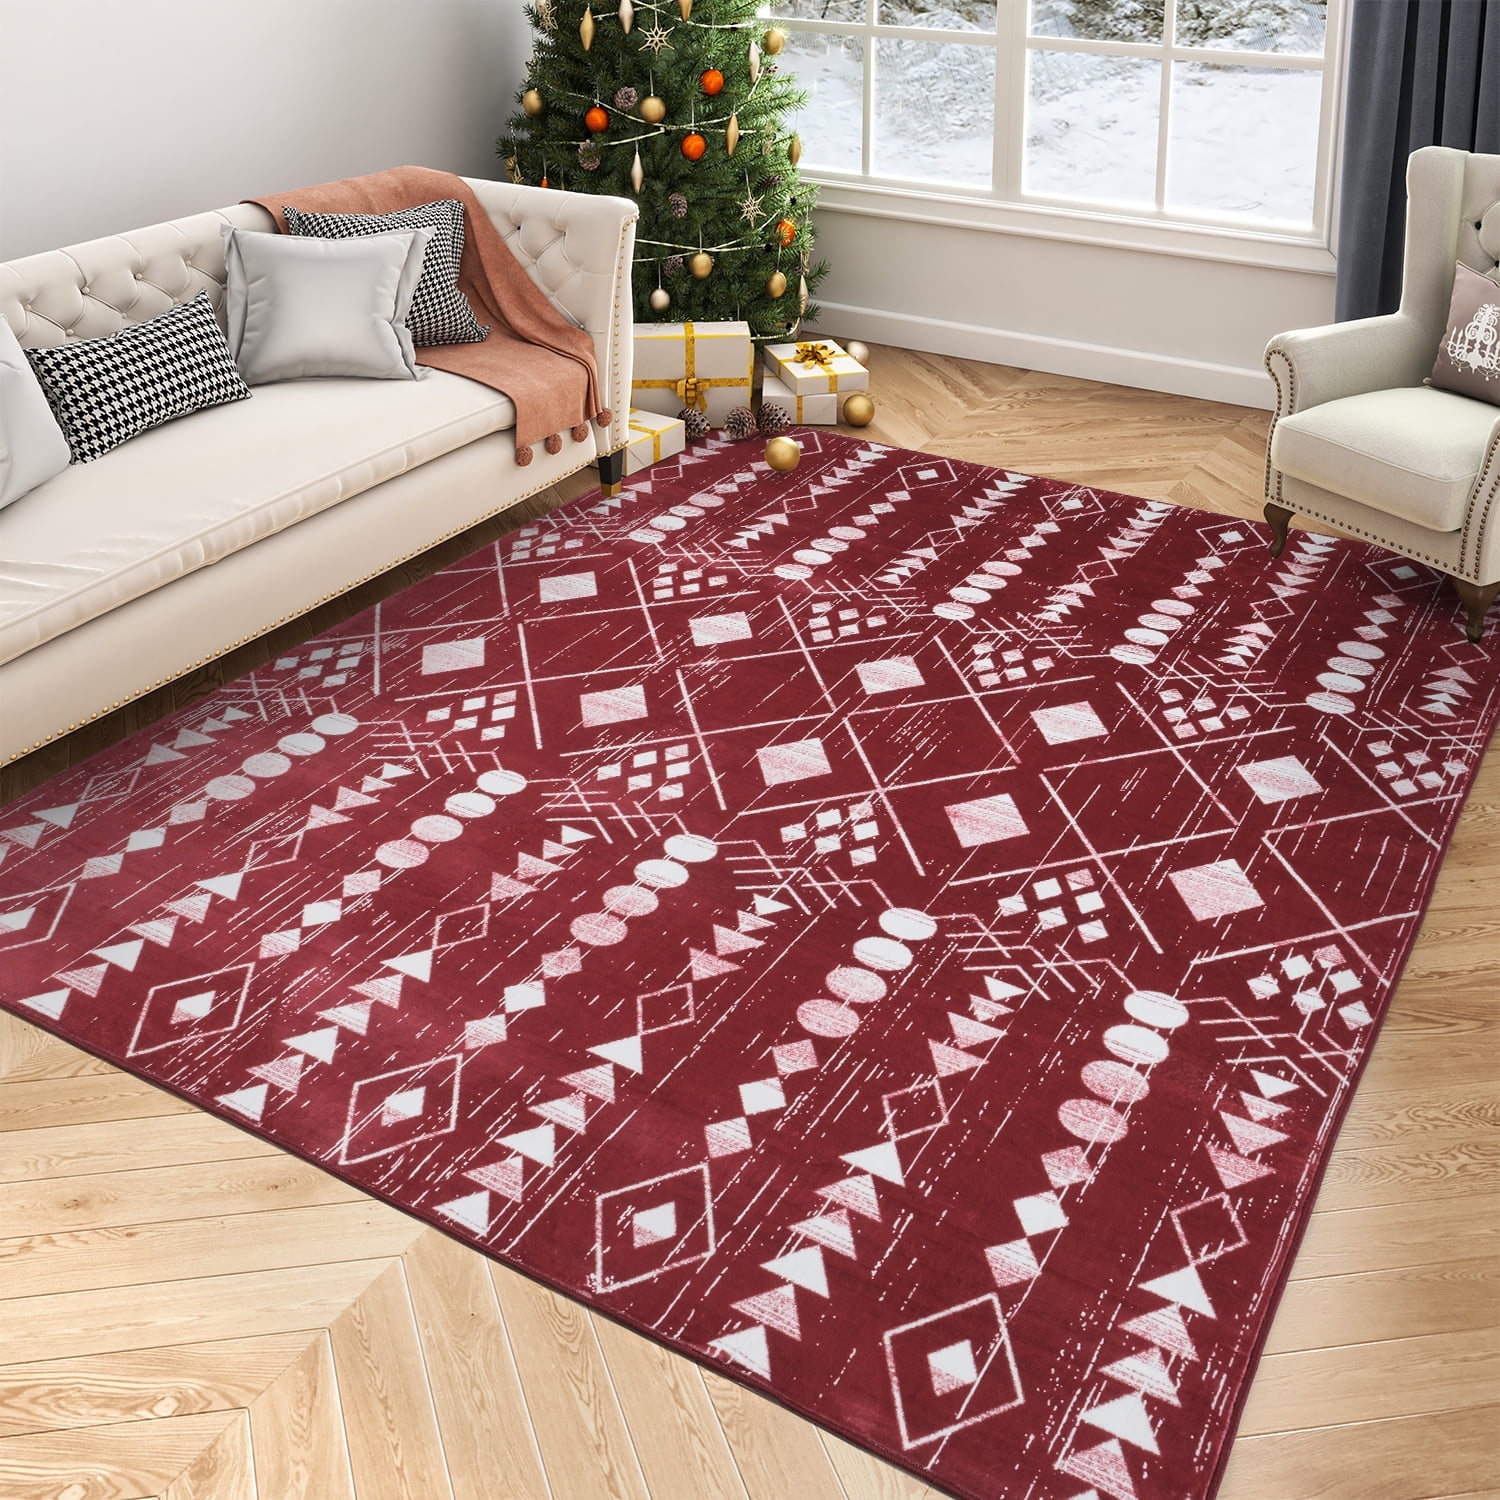  Christmas Area Rugs for Living Room, Large Indoor